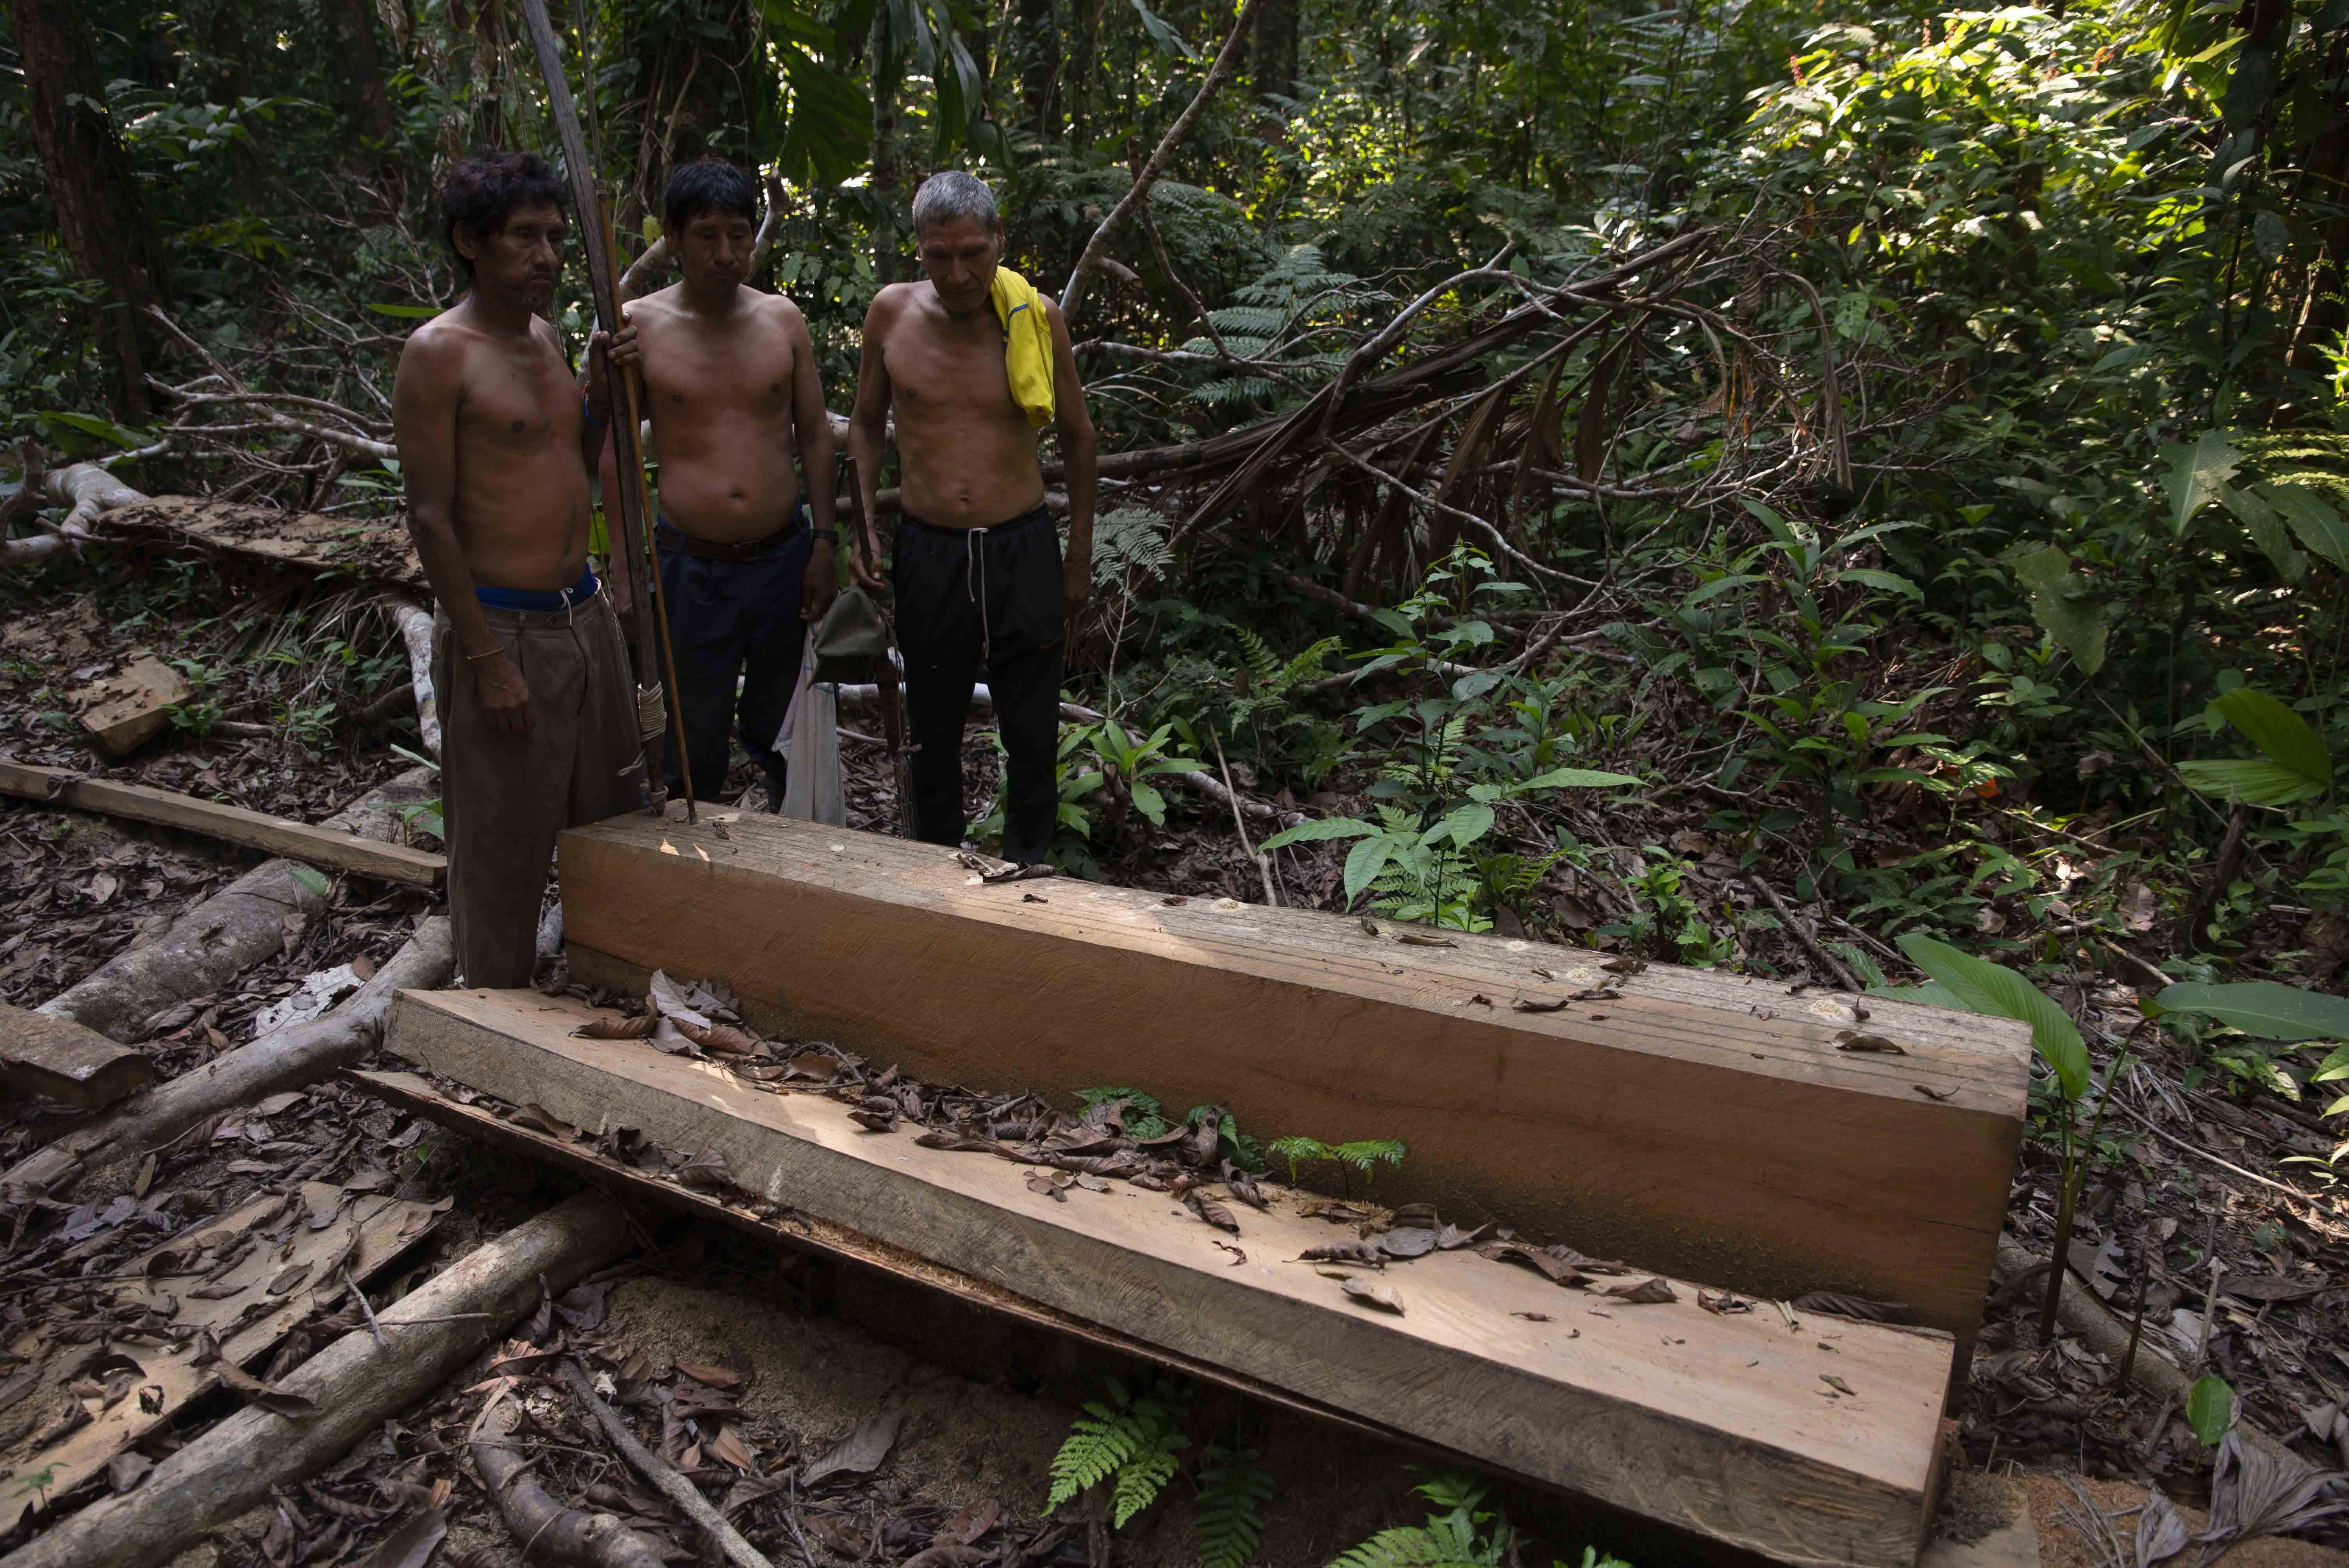 Three Yuqui villagers find an illegally cut down and logged tree within their Yuqui-CIRI TCO territory. The TCO consists of 125,000 hectares and is home to at least three different indigenous peoples: the Yuquis, the Yuracaré and the Trinitarios. There are 298 TCOs (now called TIOC) in Bolivia and they represent almost 25% of the Bolivian Amazon. Photo by Sara Aliaga. Bolivia, 2020.